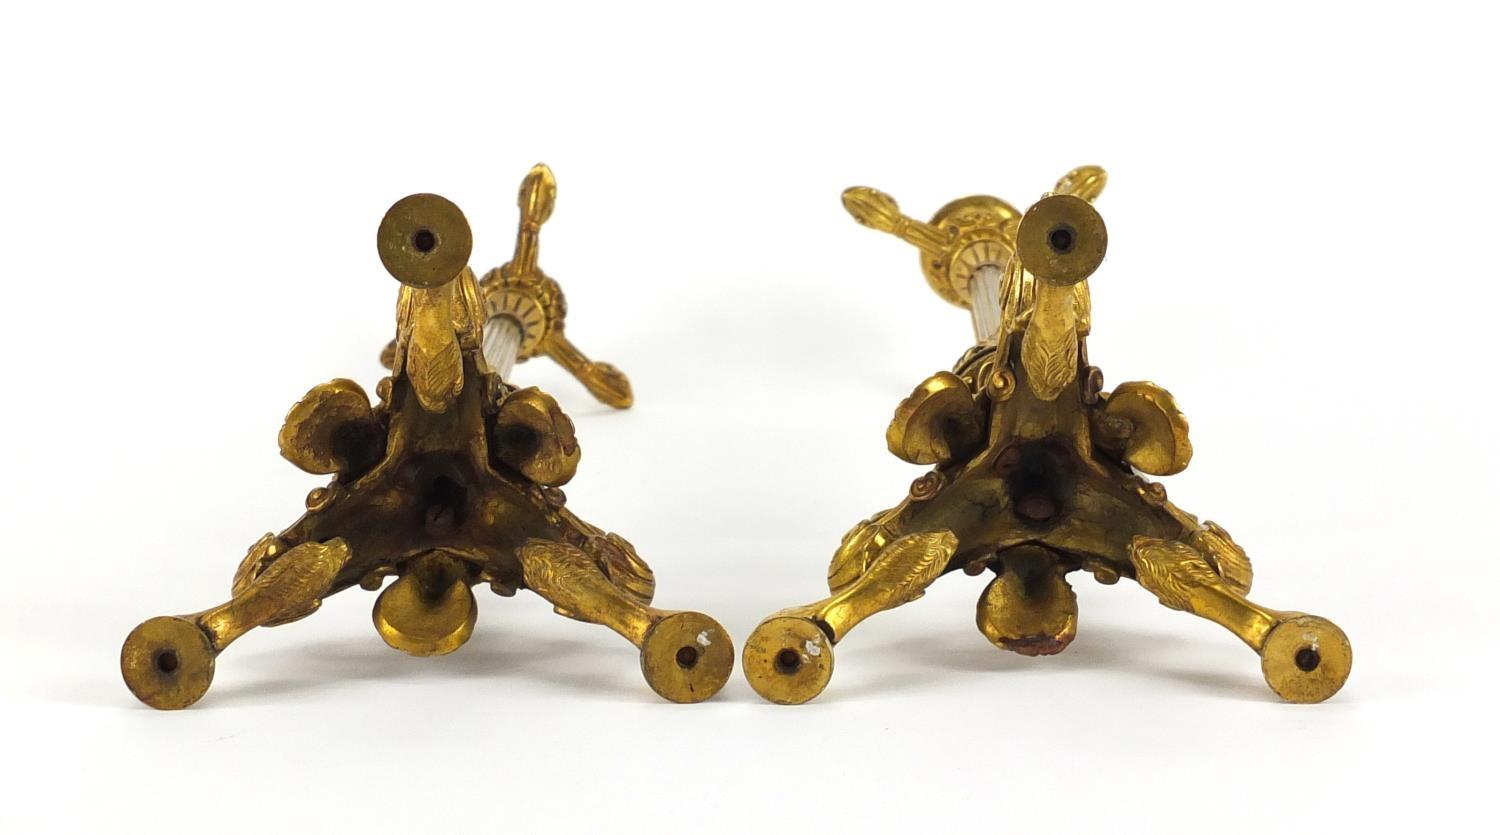 Pair of 19th century ormolu candlesticks with reeded columns, lion masks and claw feet, each 34. - Image 6 of 6